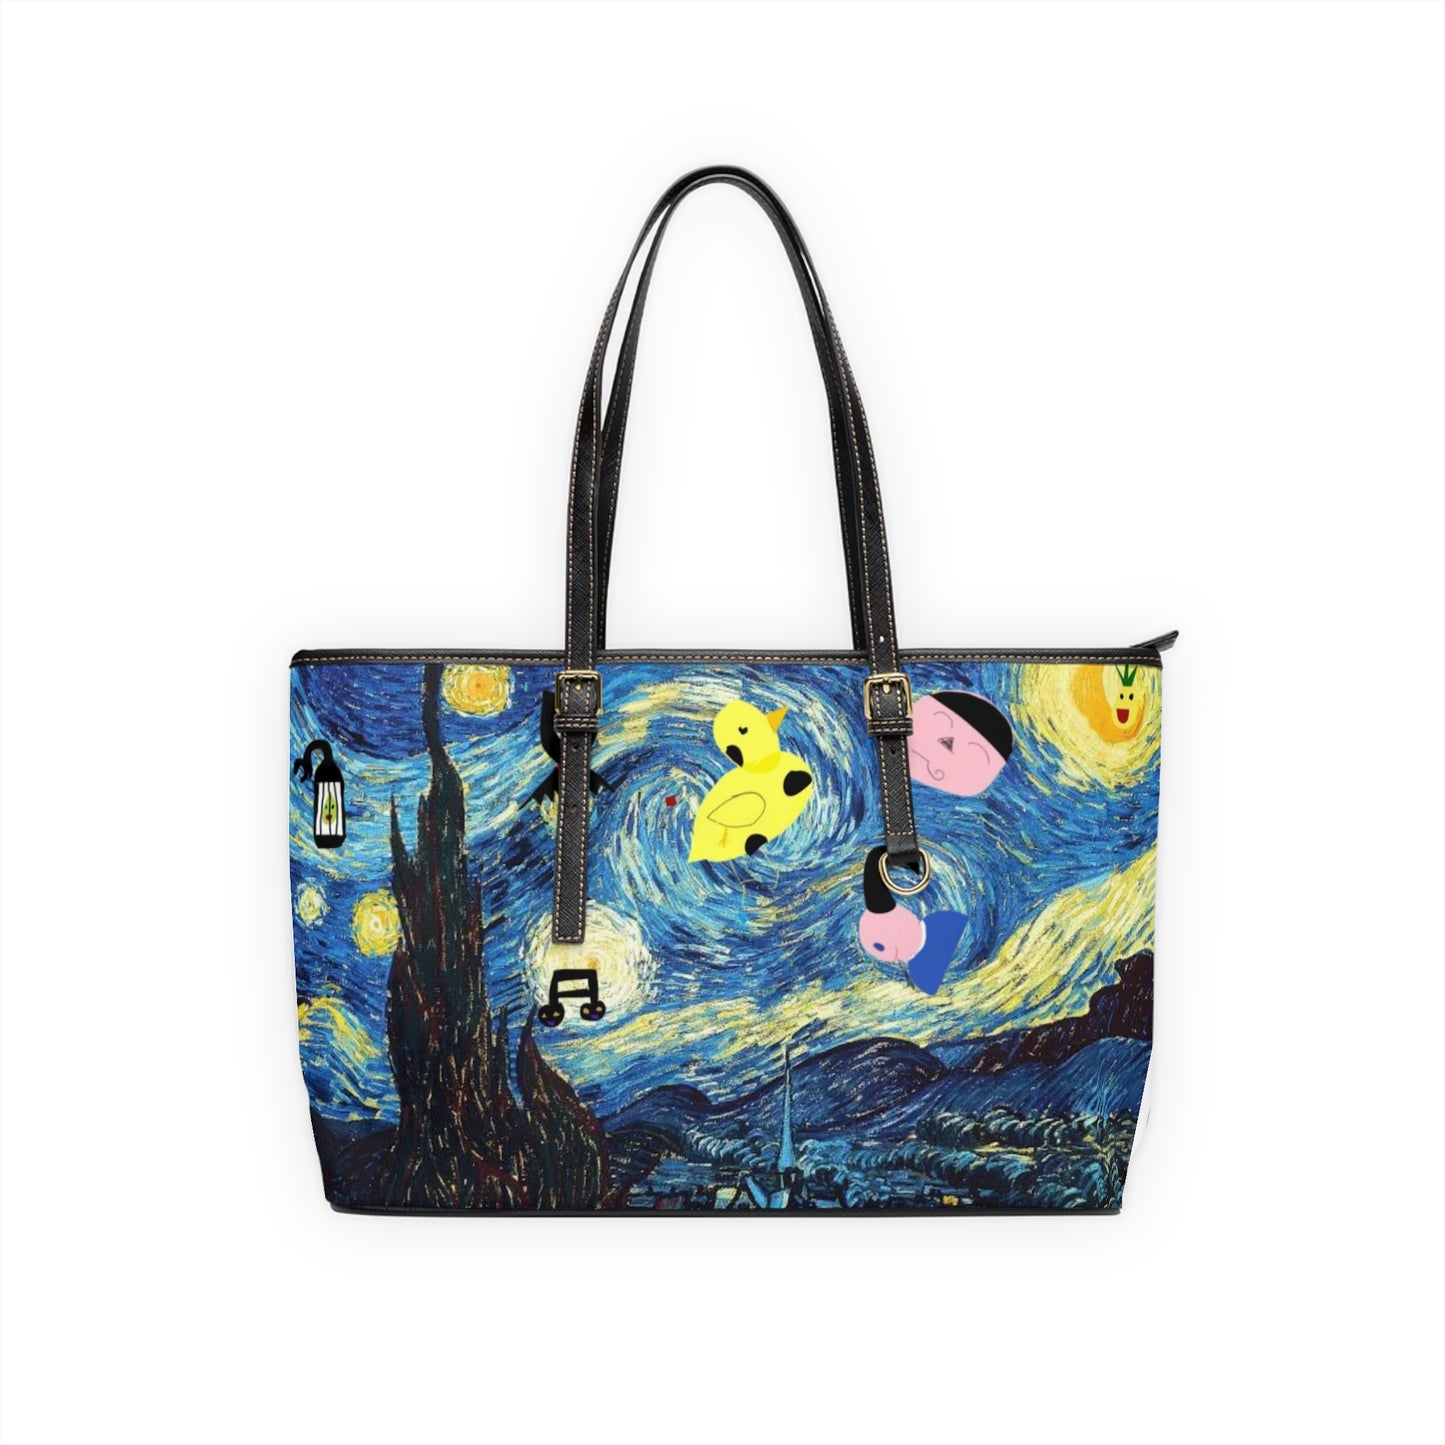 Vegan PU Leather Shoulder Bag with Oddly Starry Night Print by D.B.